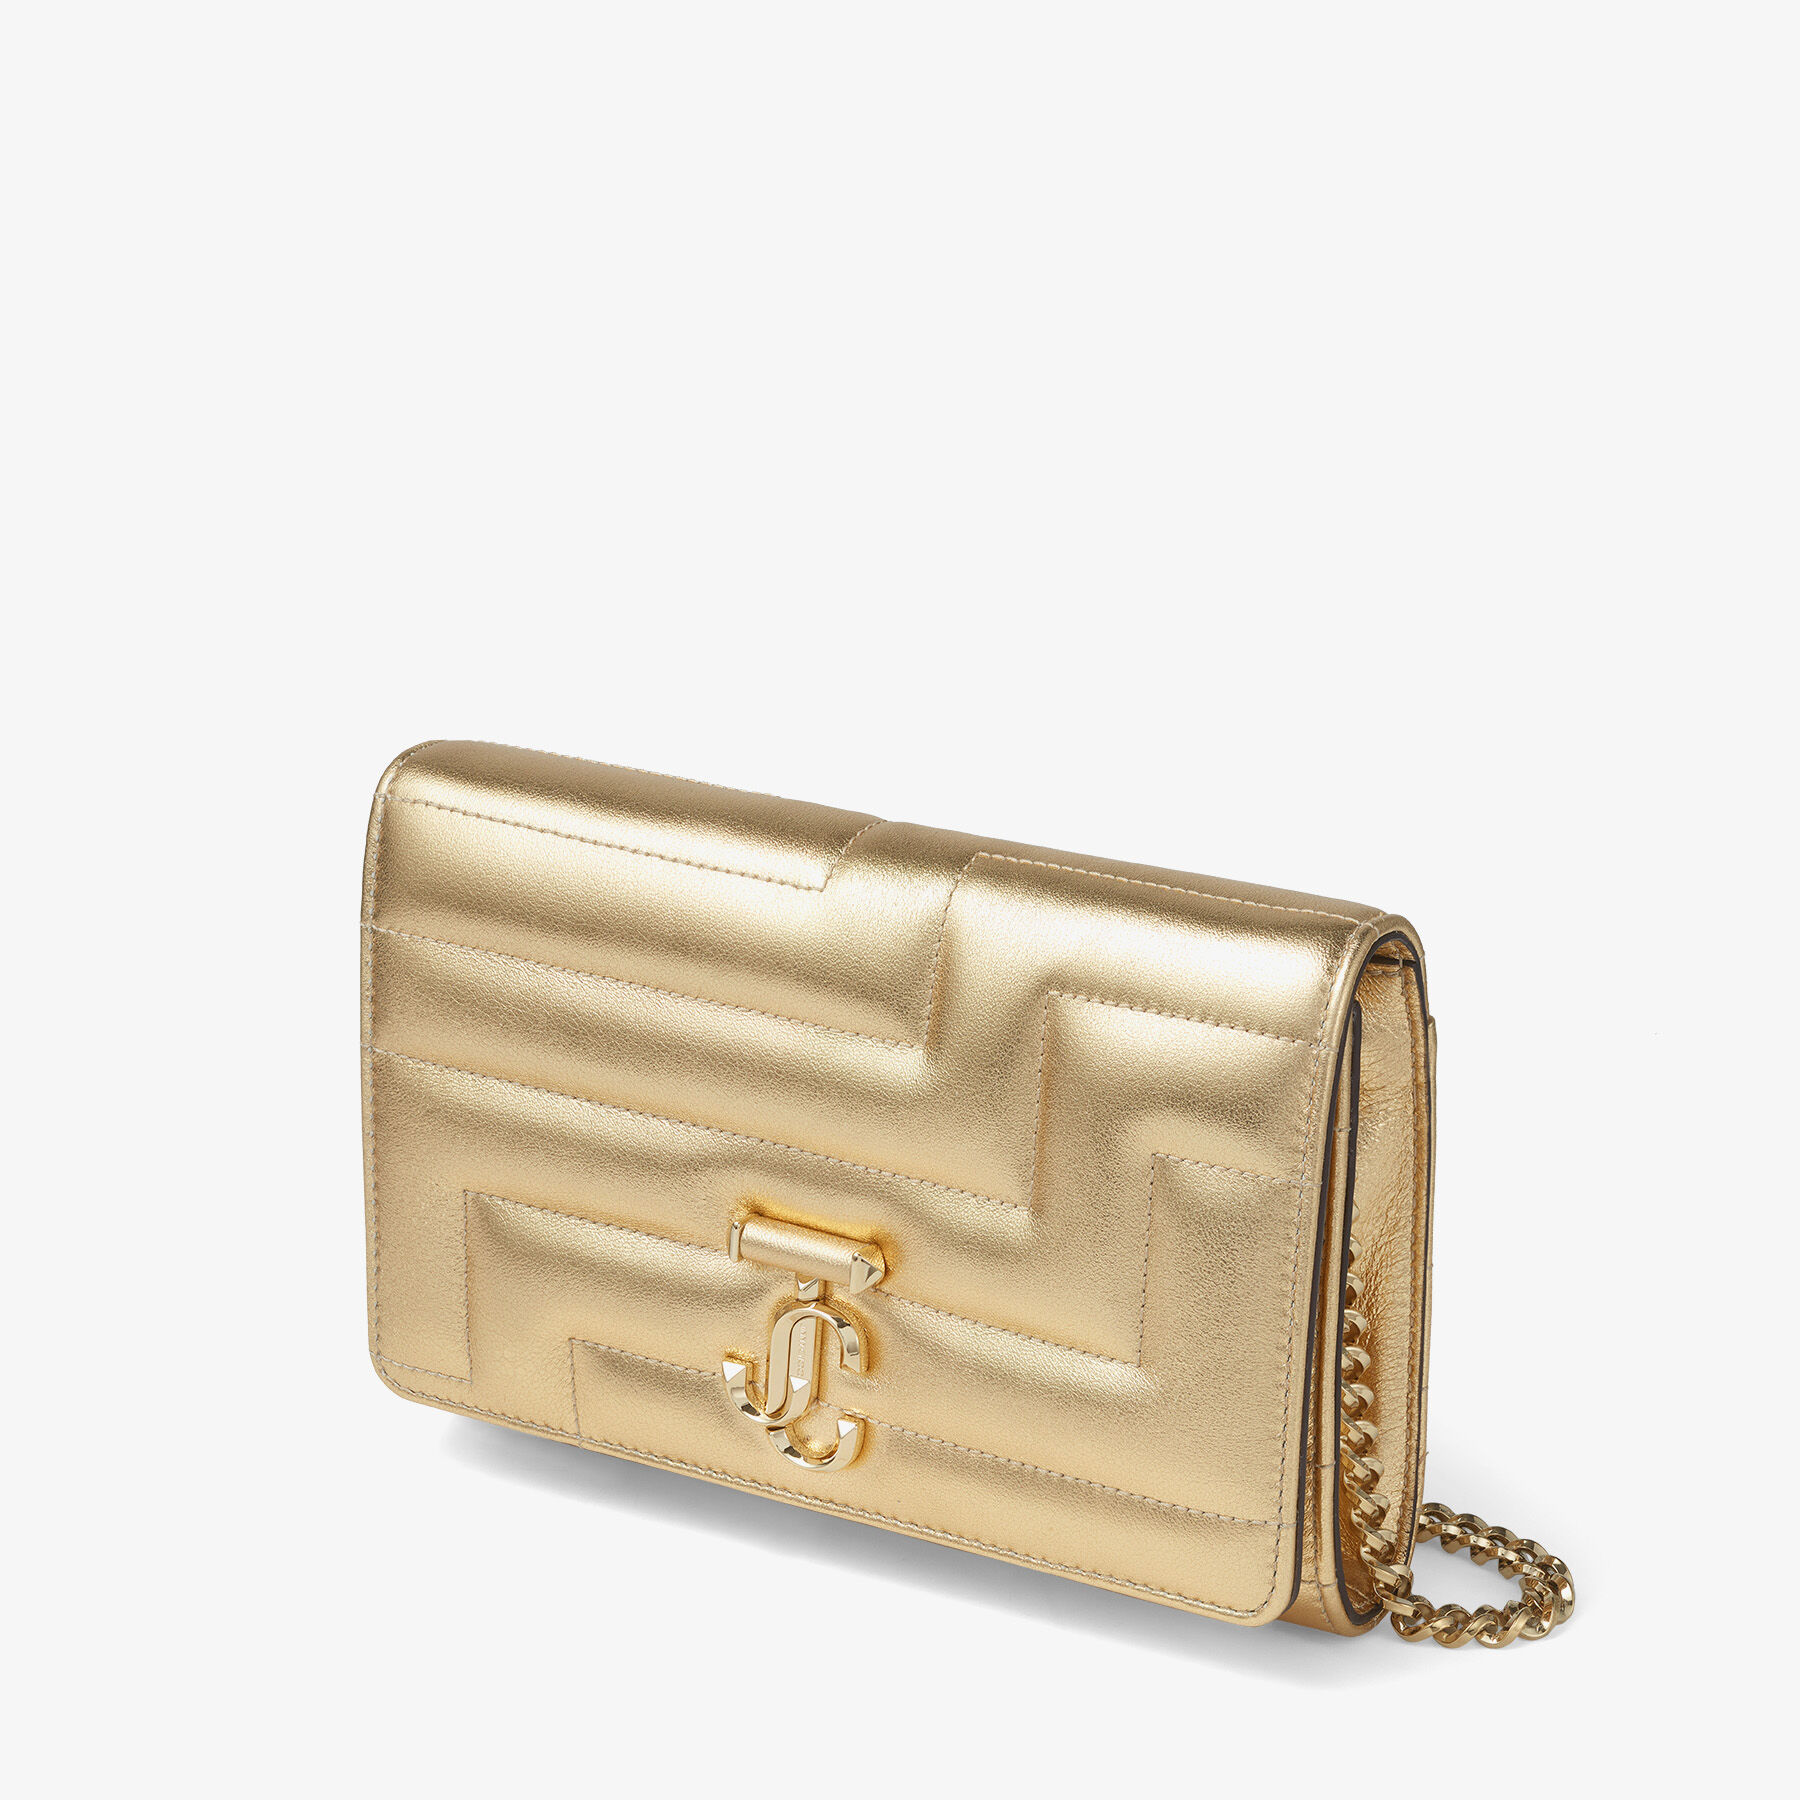 Gold Avenue Metallic Nappa Leather Clutch Bag with Light Gold JC